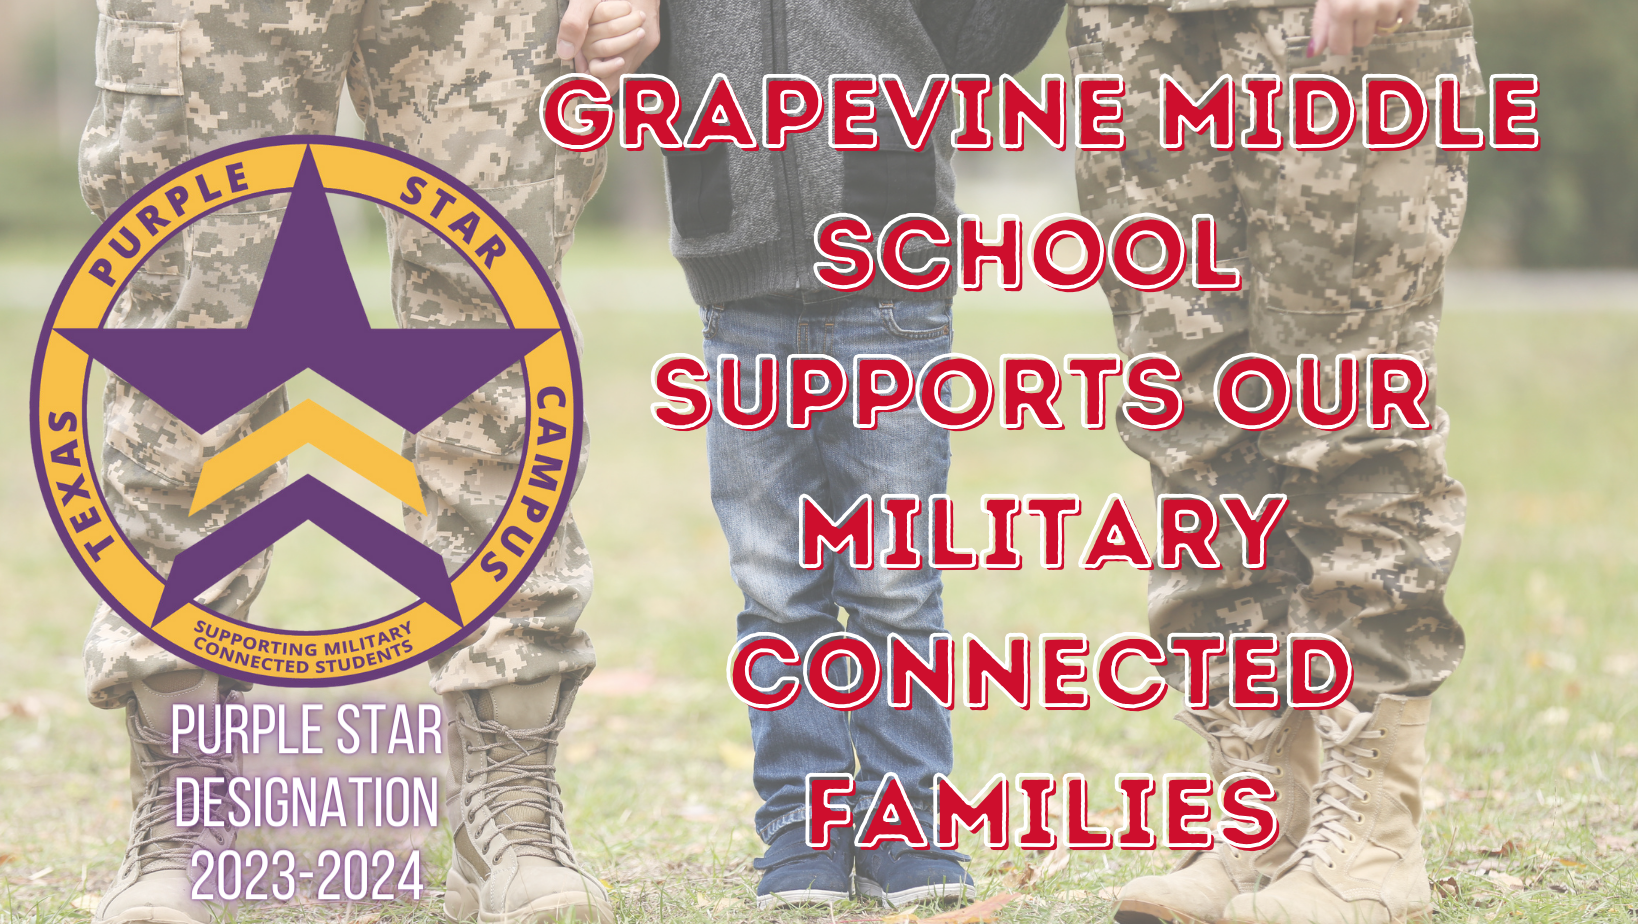 Image of two military members and a child holding hands. Grapevine Middle School Supports our military connected families. Purple Star Campus